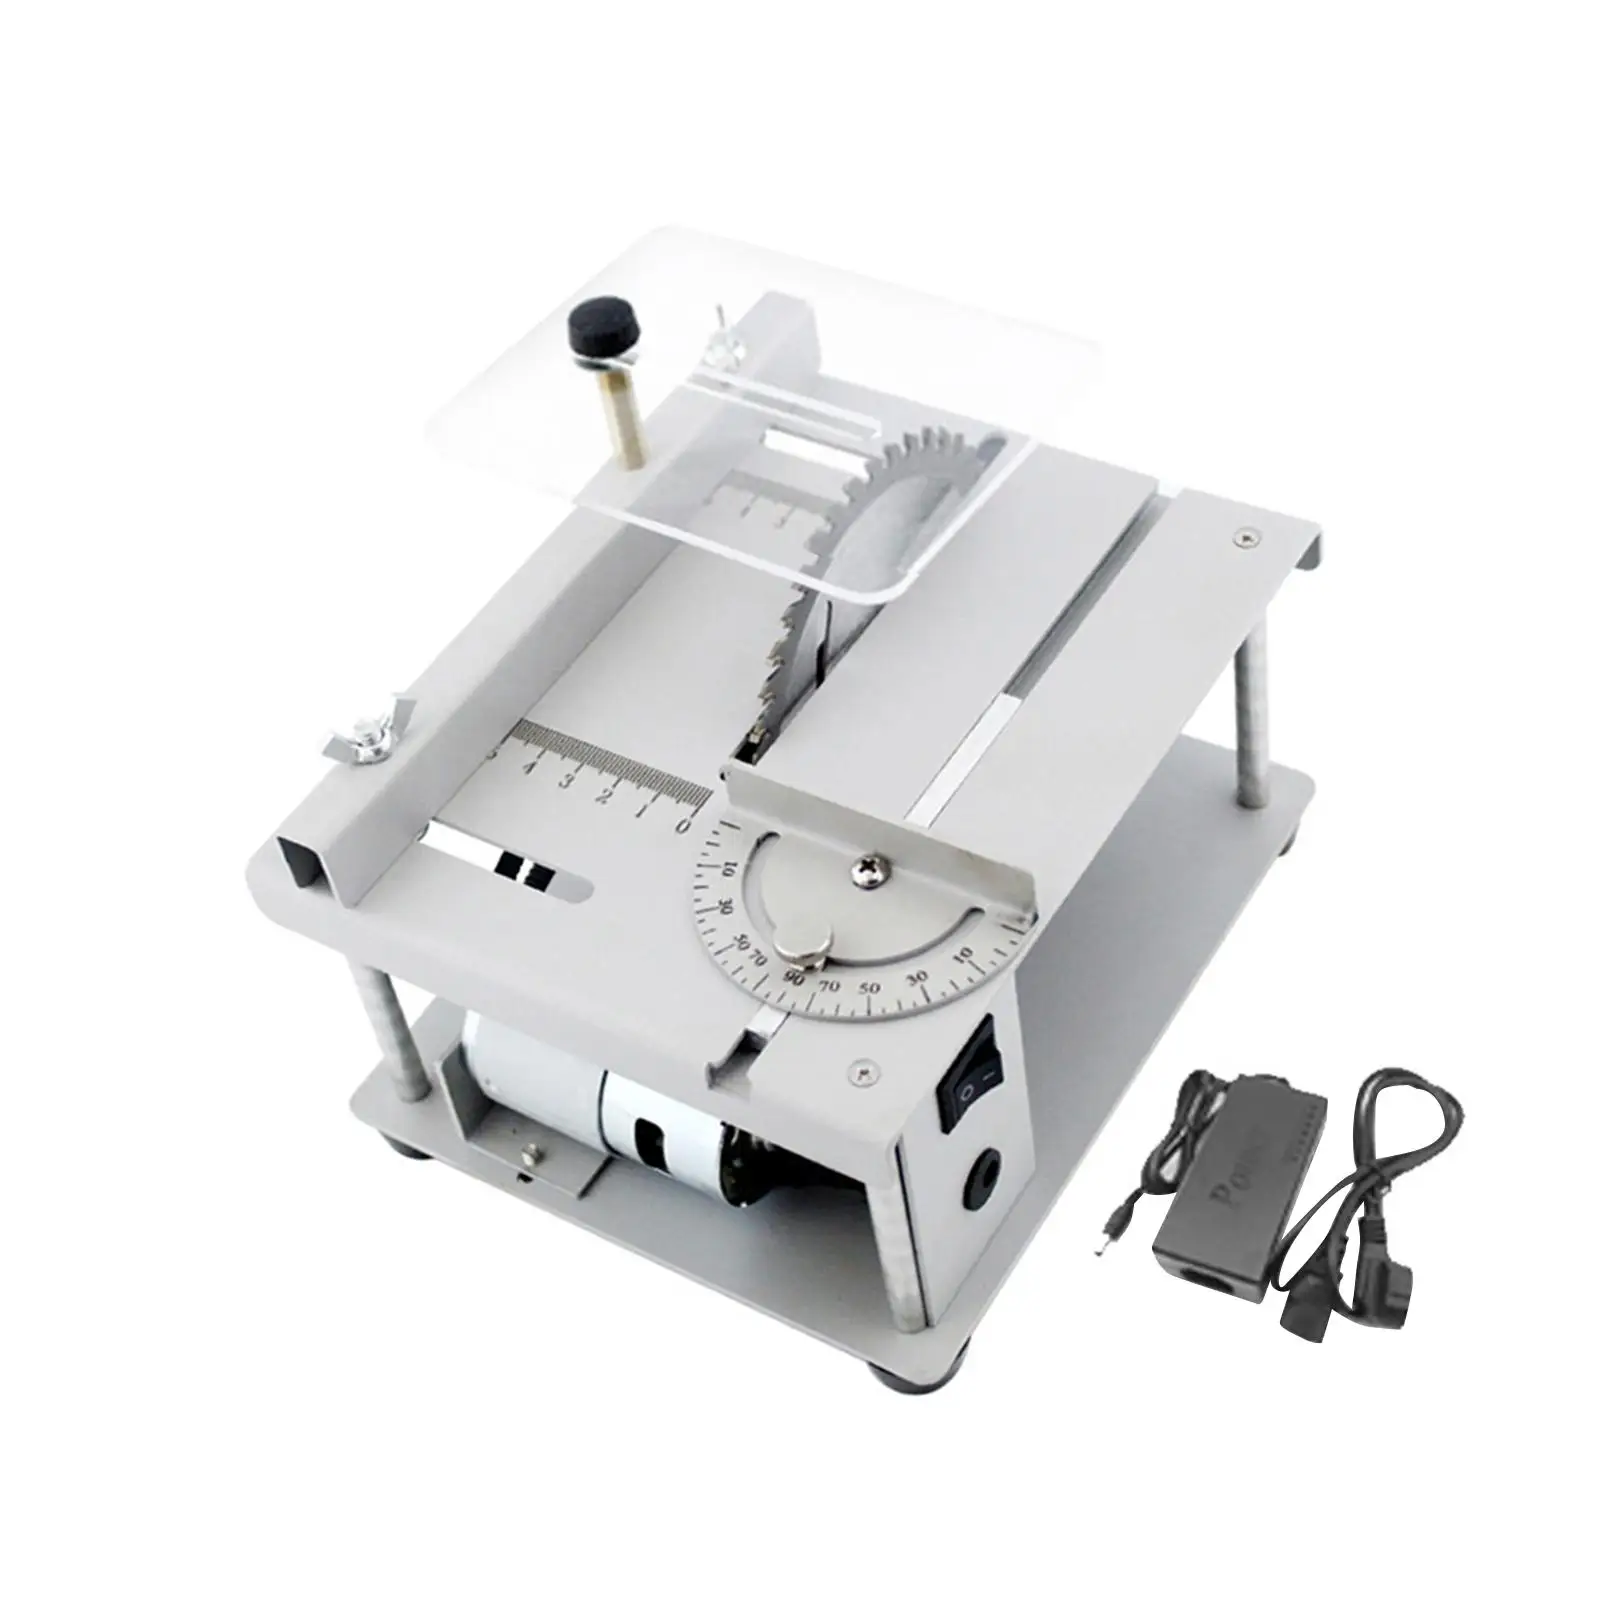 

Mini Table Saw DIY Wood Acrylic Handmade Model Cutter Machine Woodworking Bench Saw for Wood Crafts Miniatures Metal Aluminum